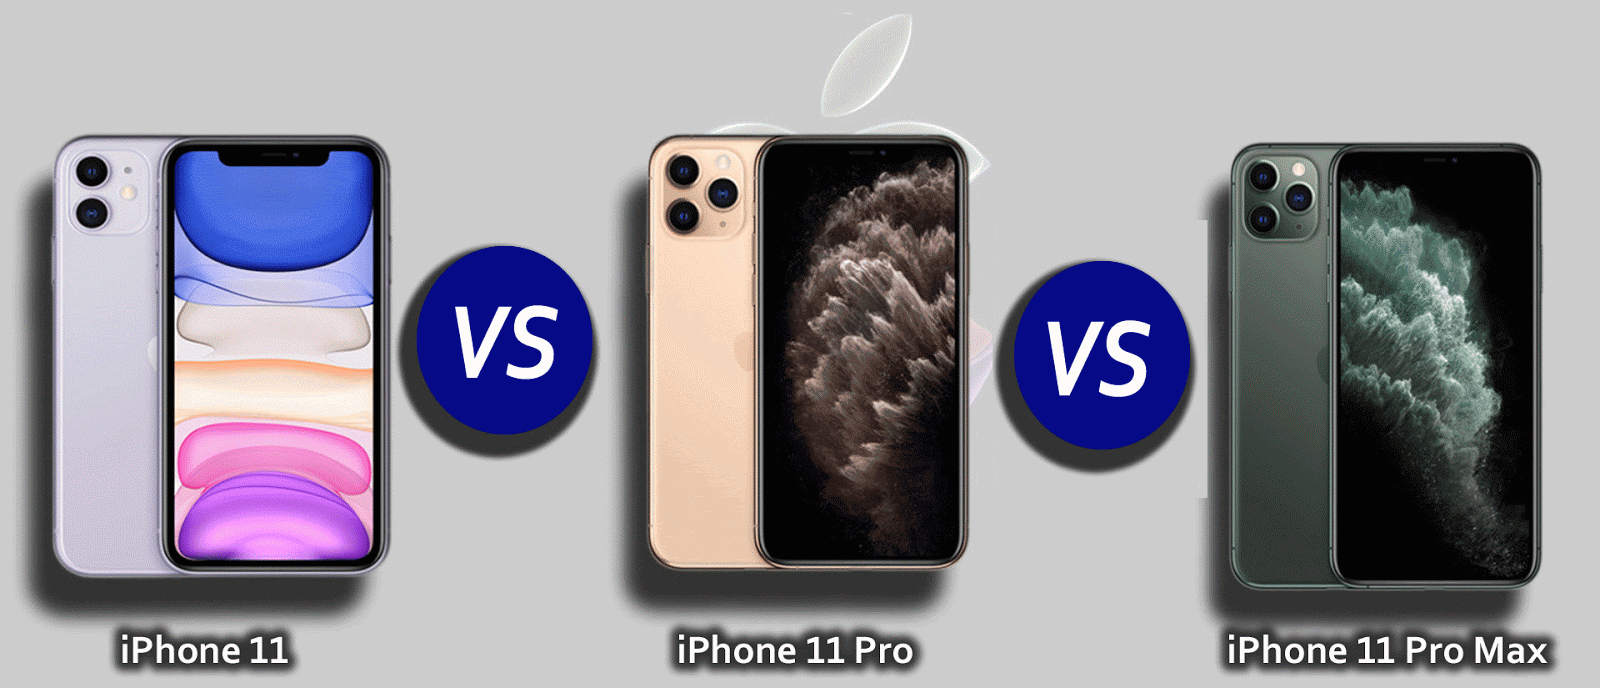 Which Better Iphone 11 Vs Iphone 11 Pro Vs Iphone 11 Pro Max Compare